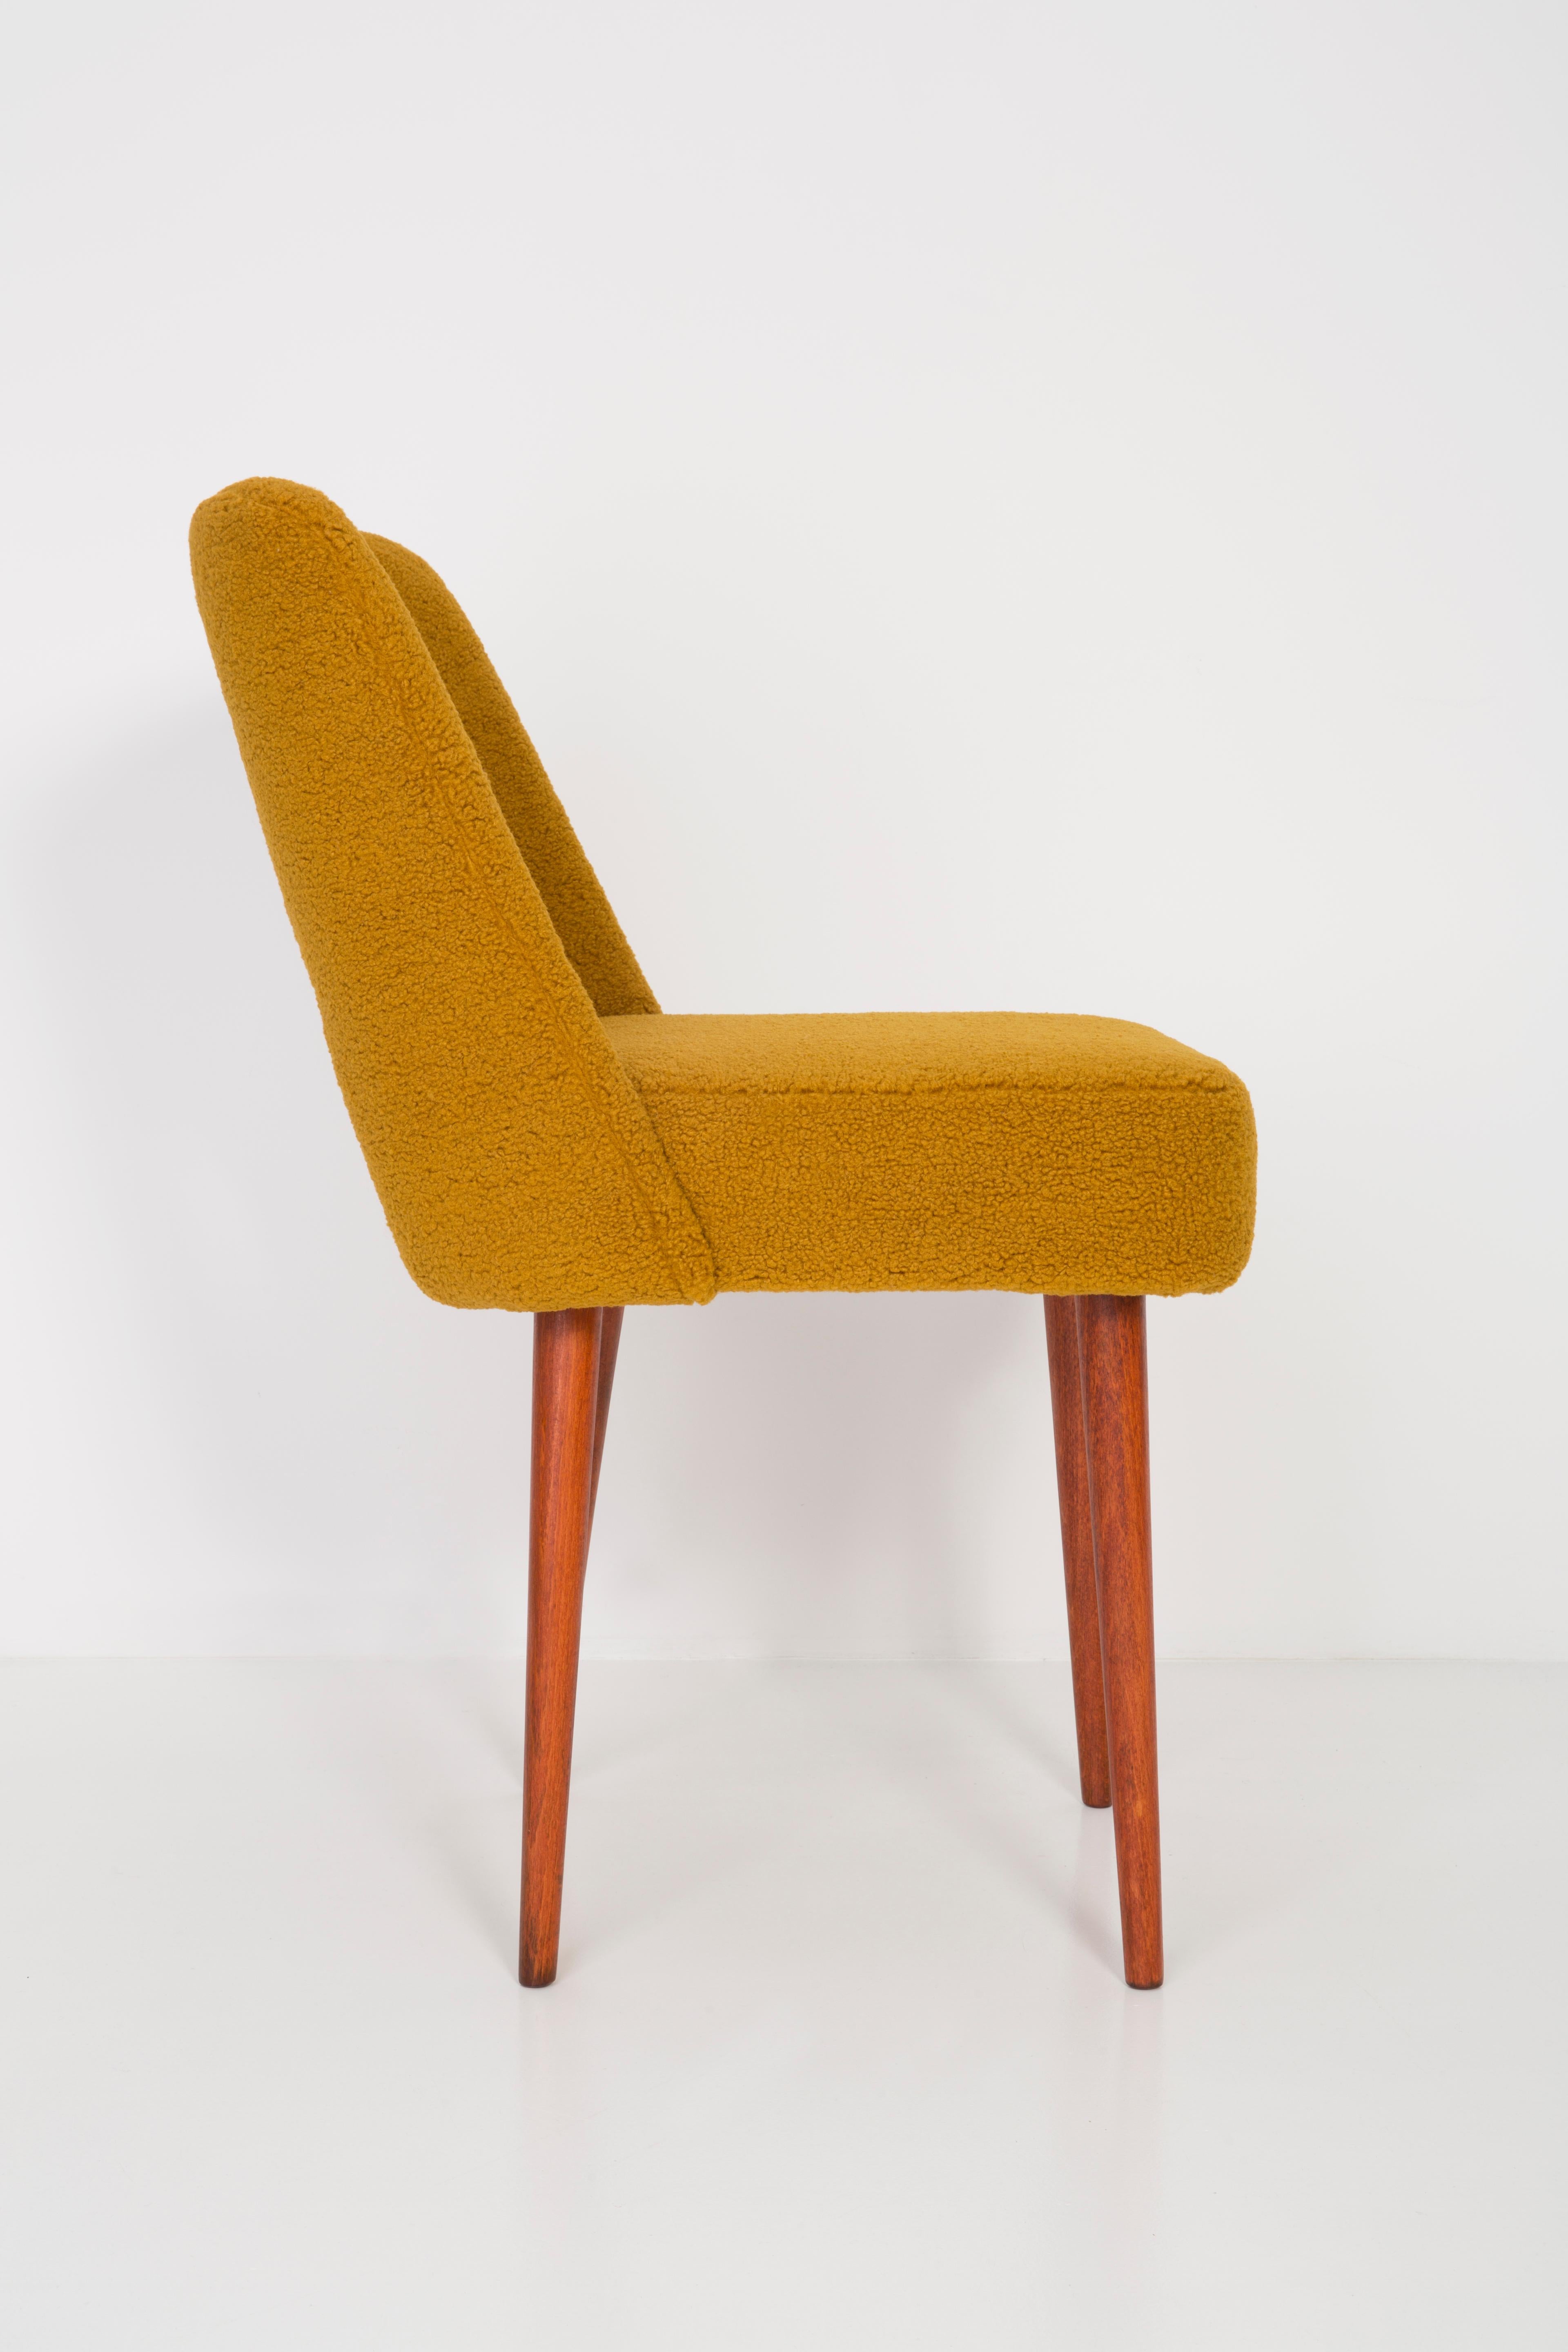 Hand-Crafted Yellow Ochre Boucle 'Shell' Chair, 1960s For Sale